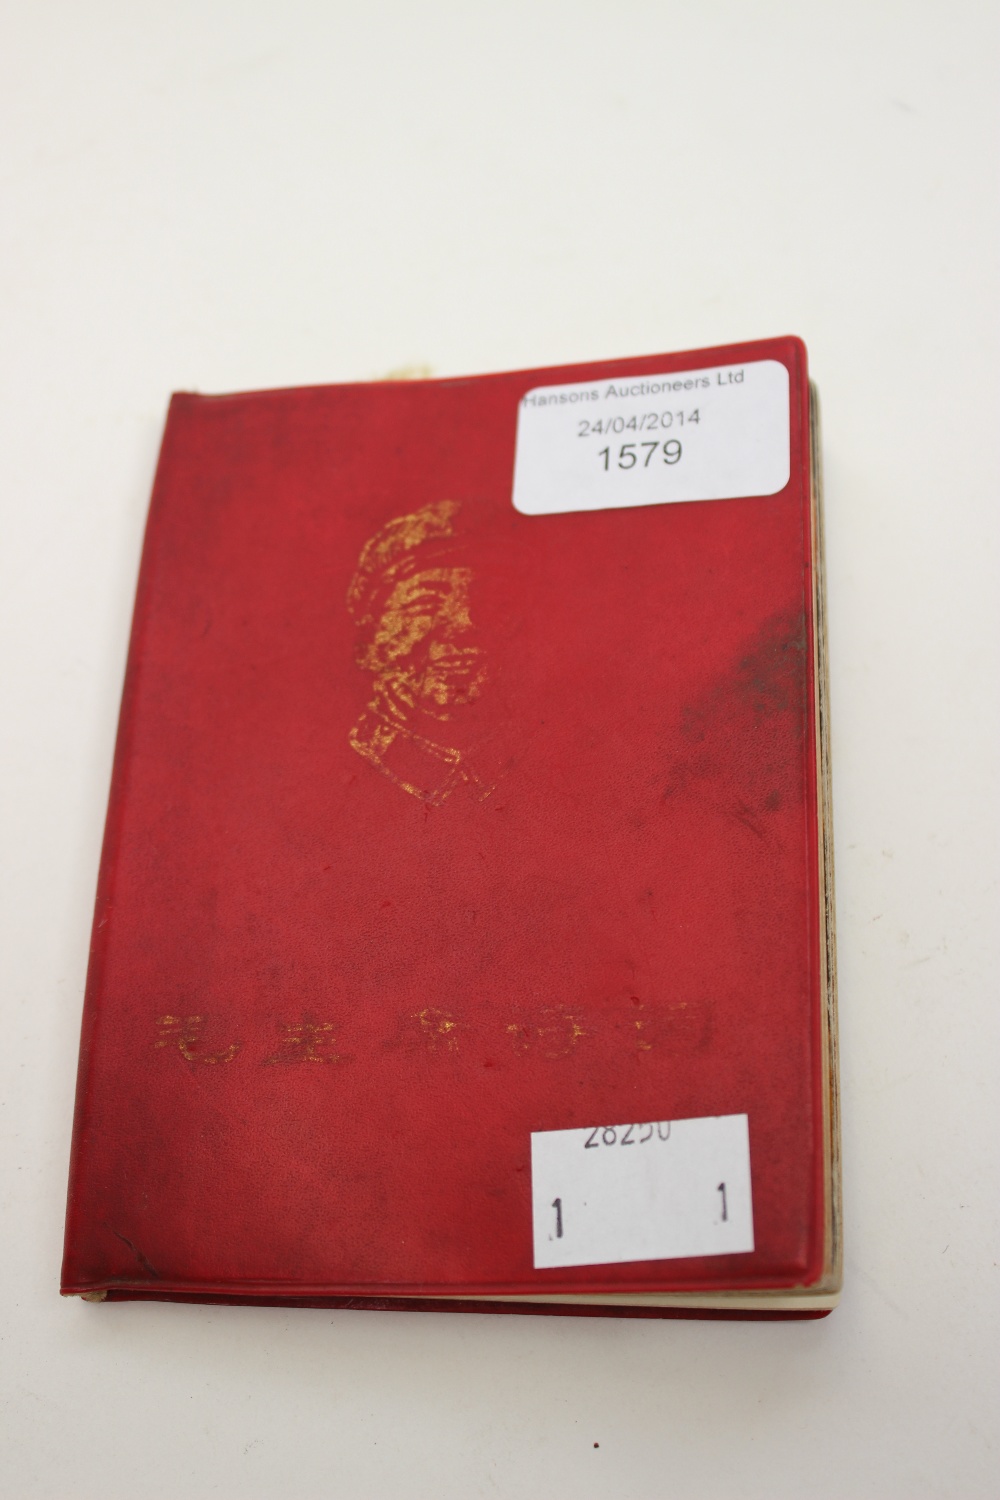 Chairman Mao's Little Red Book of Verses